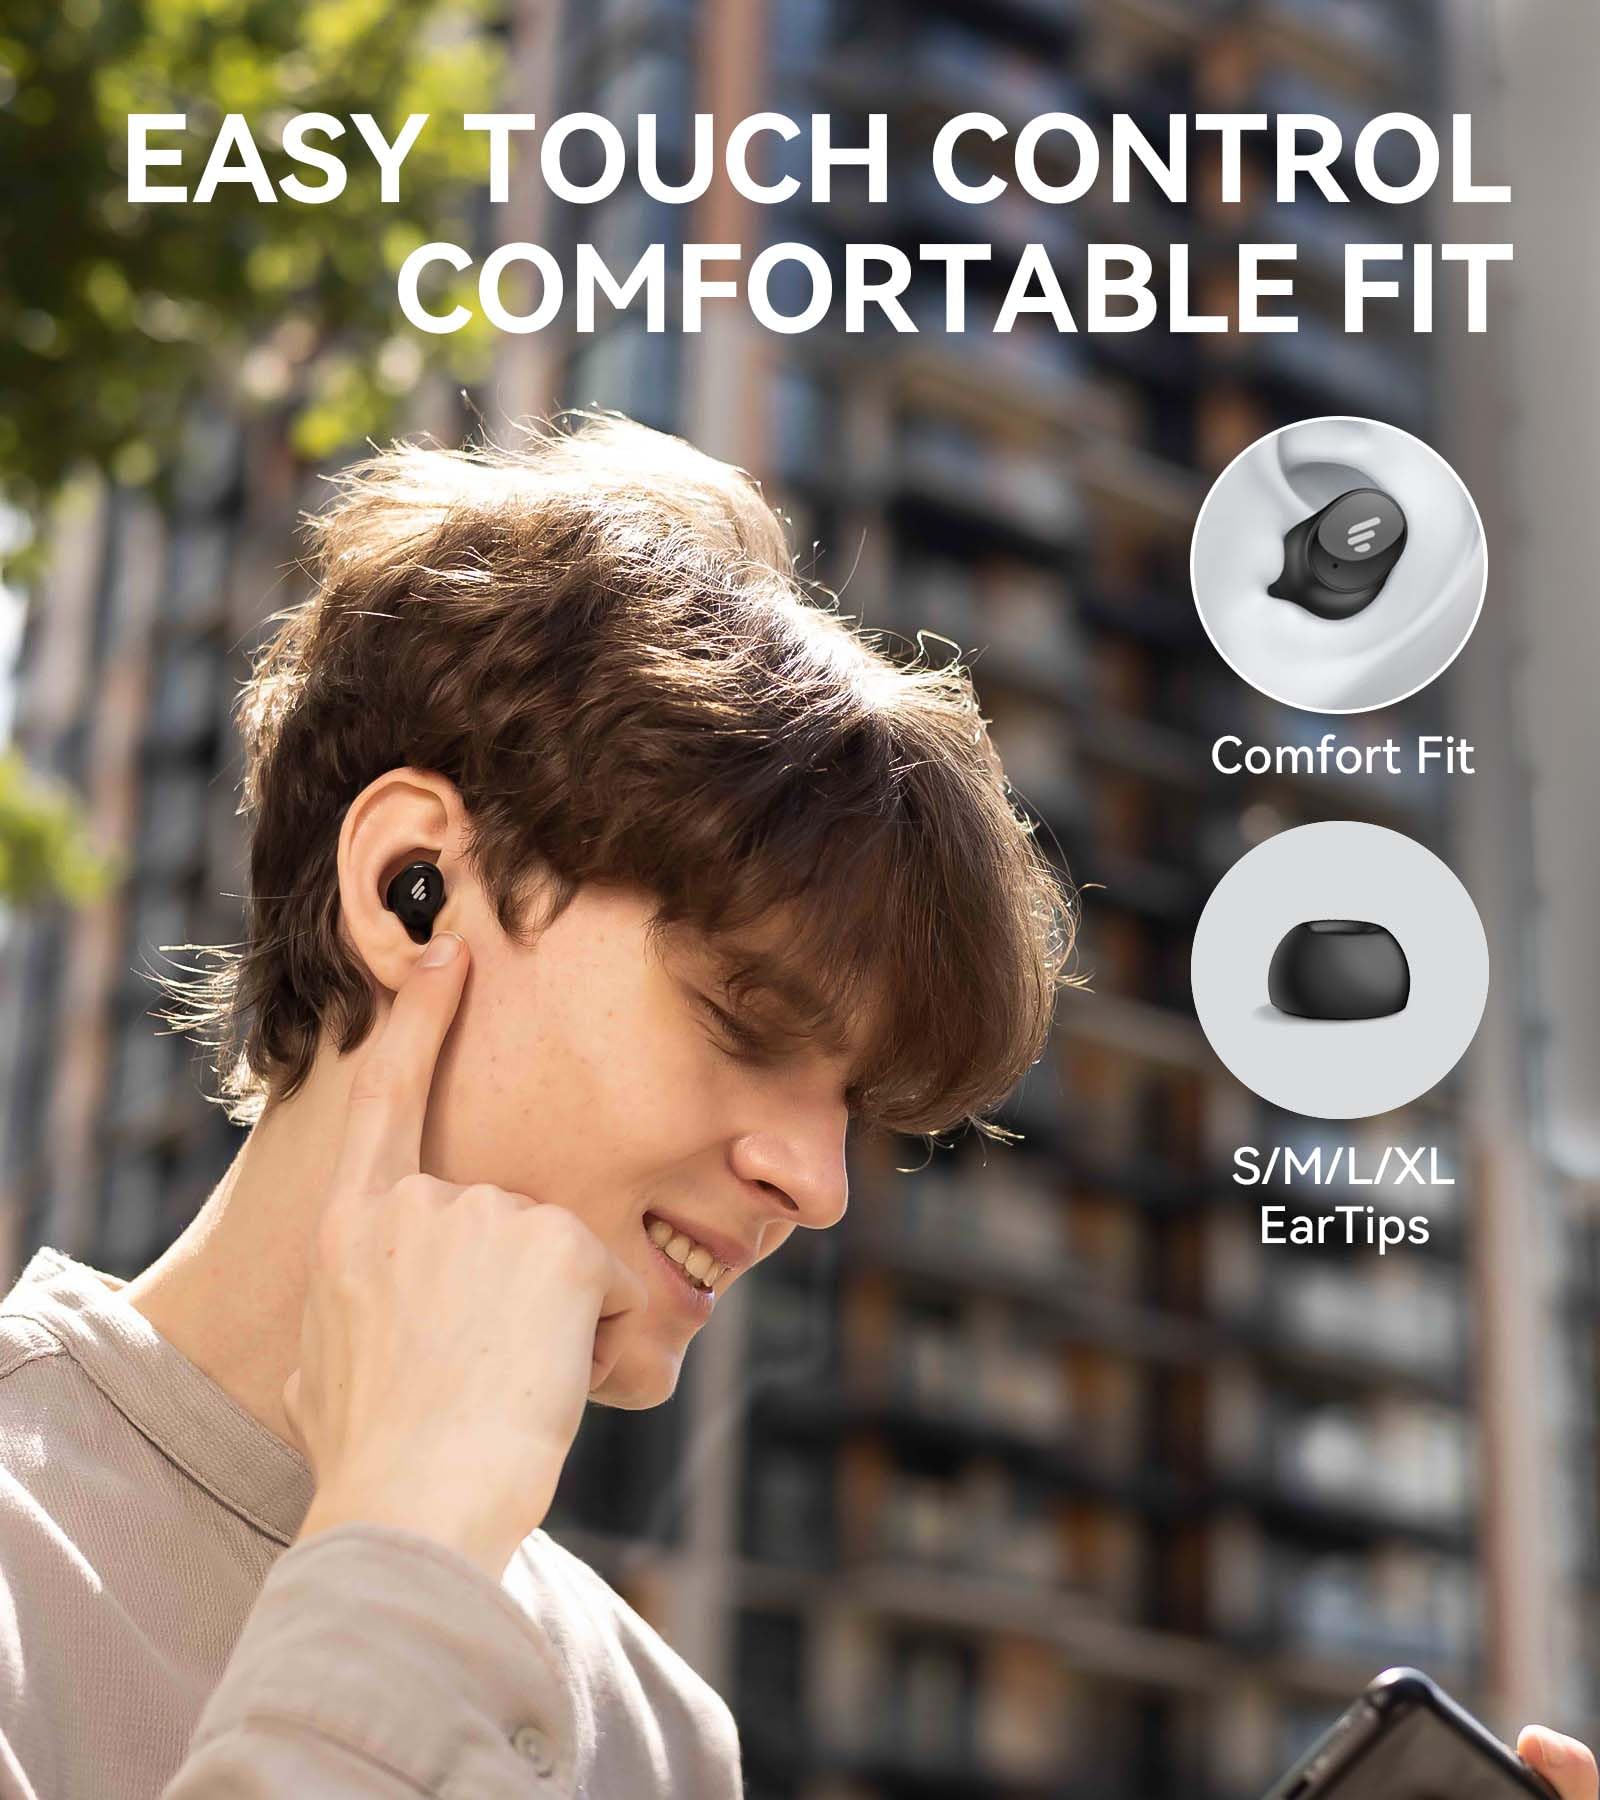 Edifier TWS1 Pro 2 Active Noise Cancellation Earbuds, 42dB Depth ANC, AI-Enhanced Calls with 4 Mics, in-Ear Detection, Fast Charging, Bluetooth 5.3